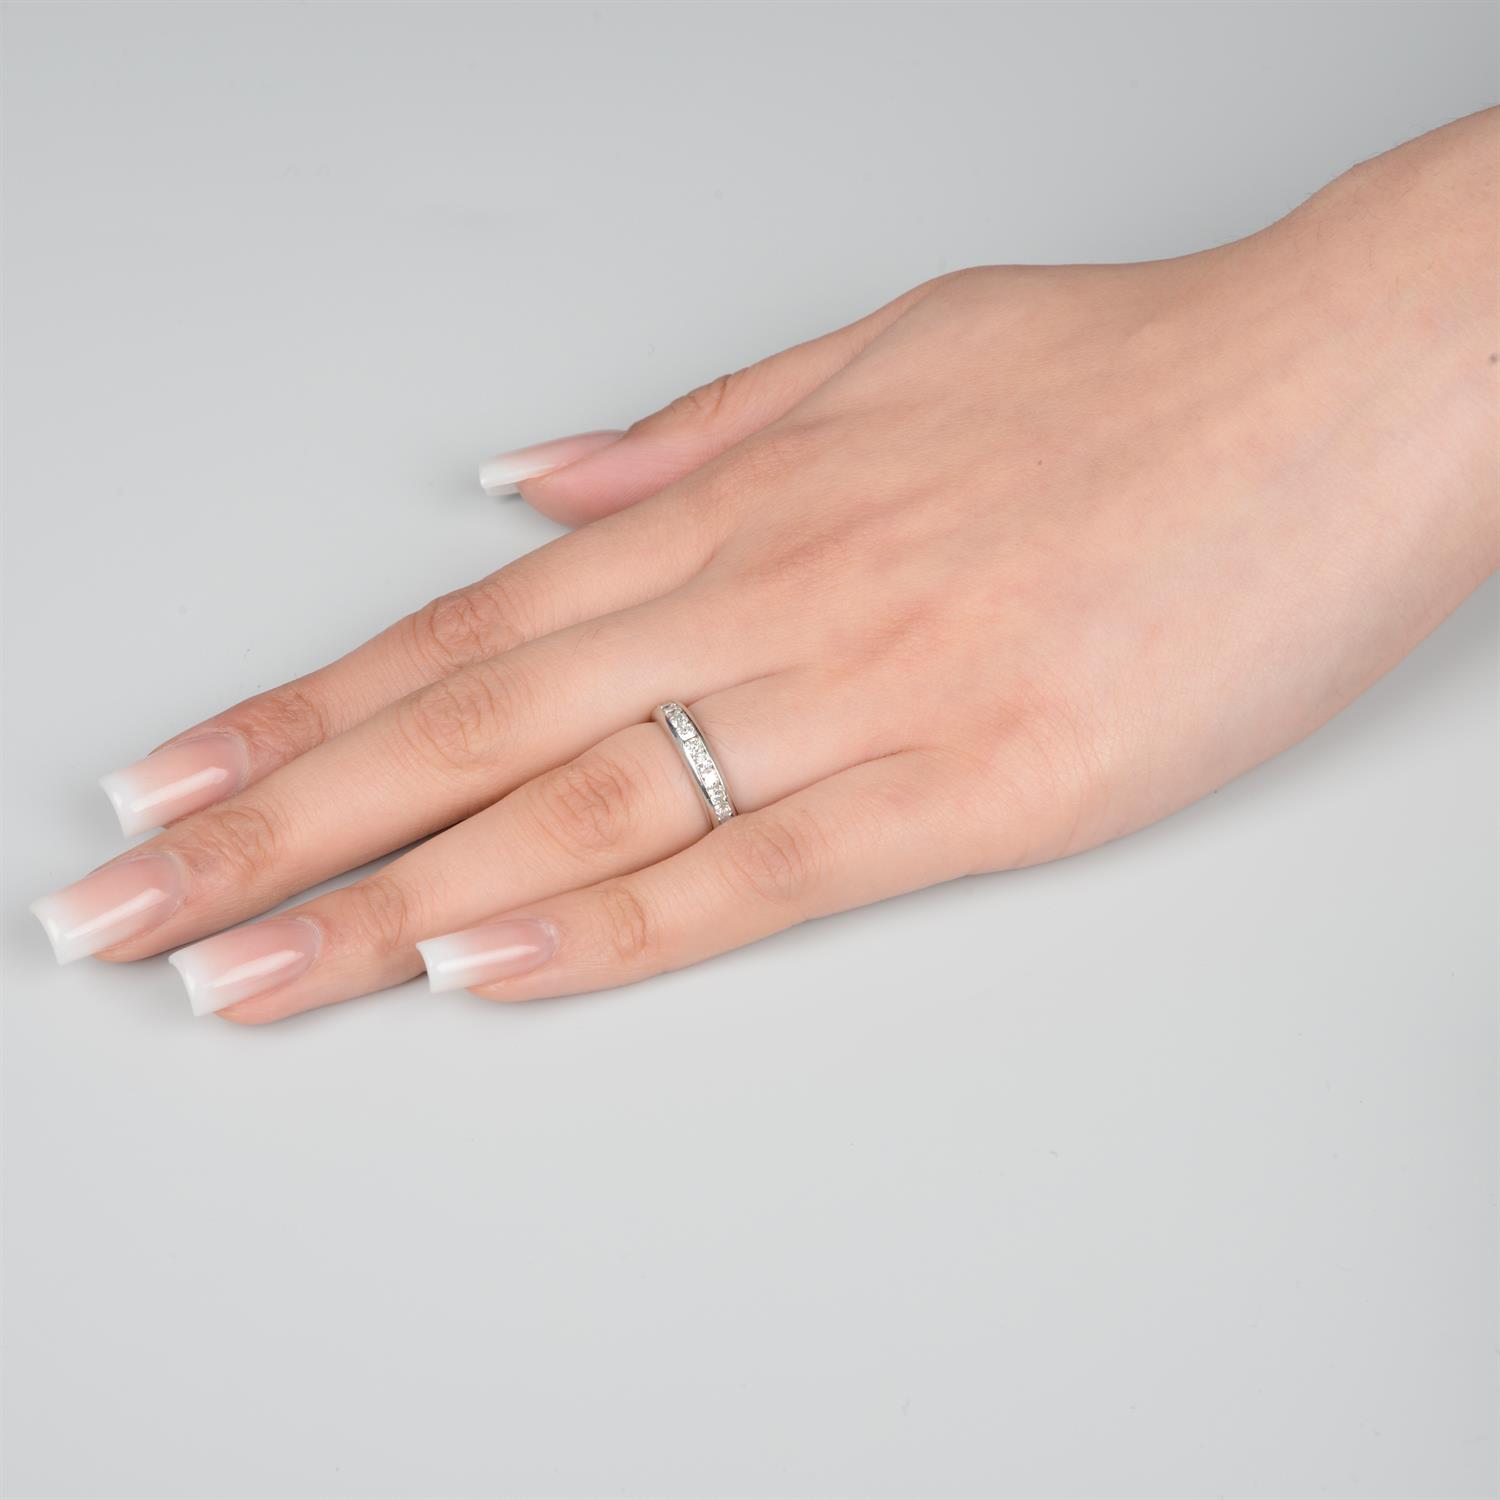 Lucida-cut diamond band ring, by Tiffany & Co. - Image 5 of 5